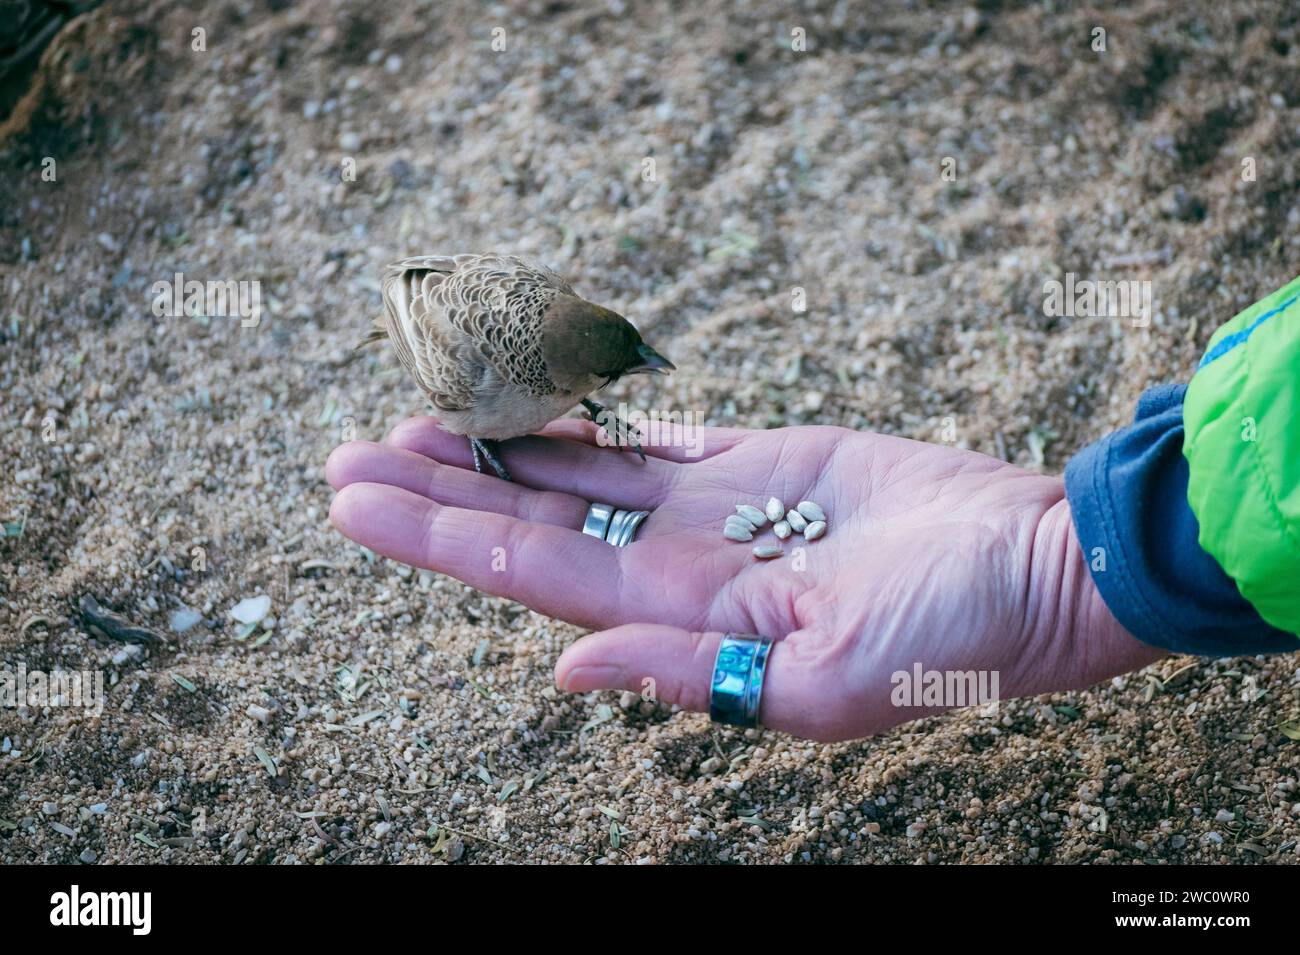 A small brave bird sits on a womans hand to eat some sunflower seeds at a campsite in Namibia Stock Photo